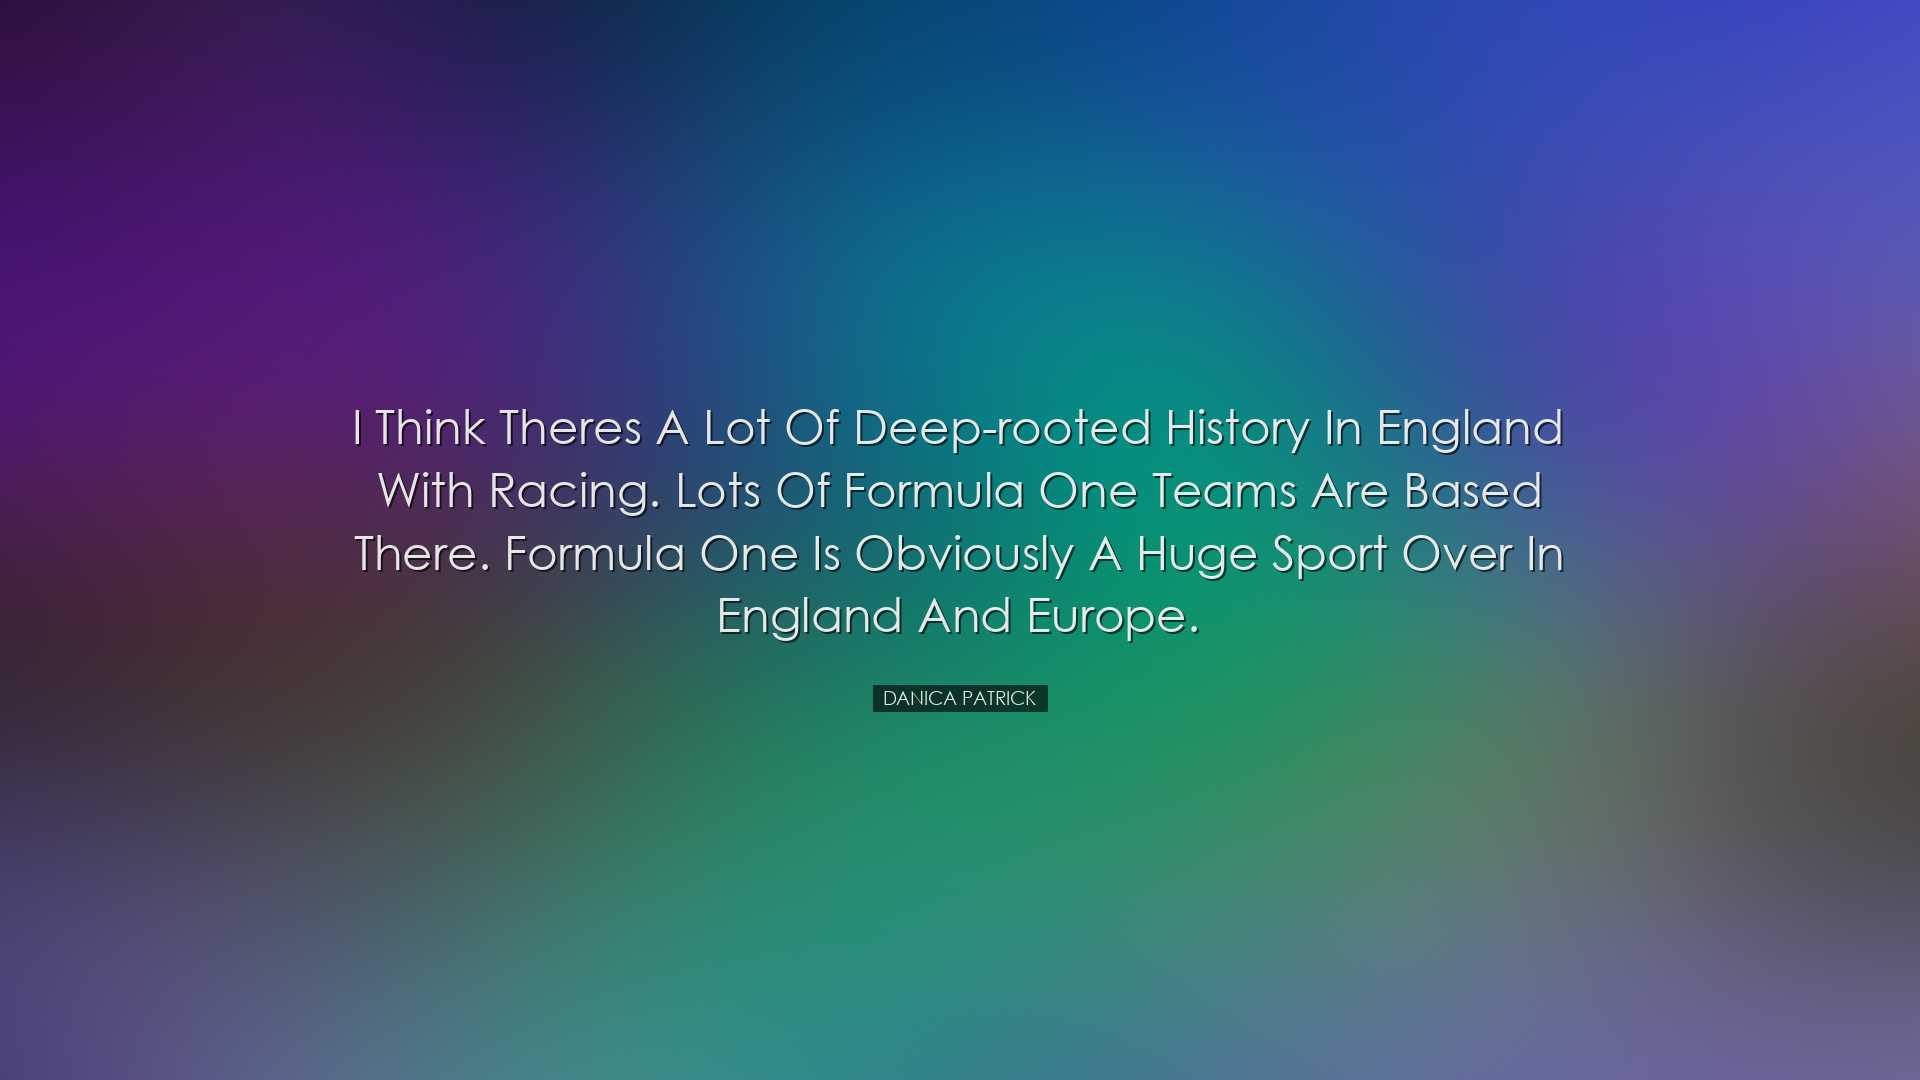 I think theres a lot of deep-rooted history in England with racing